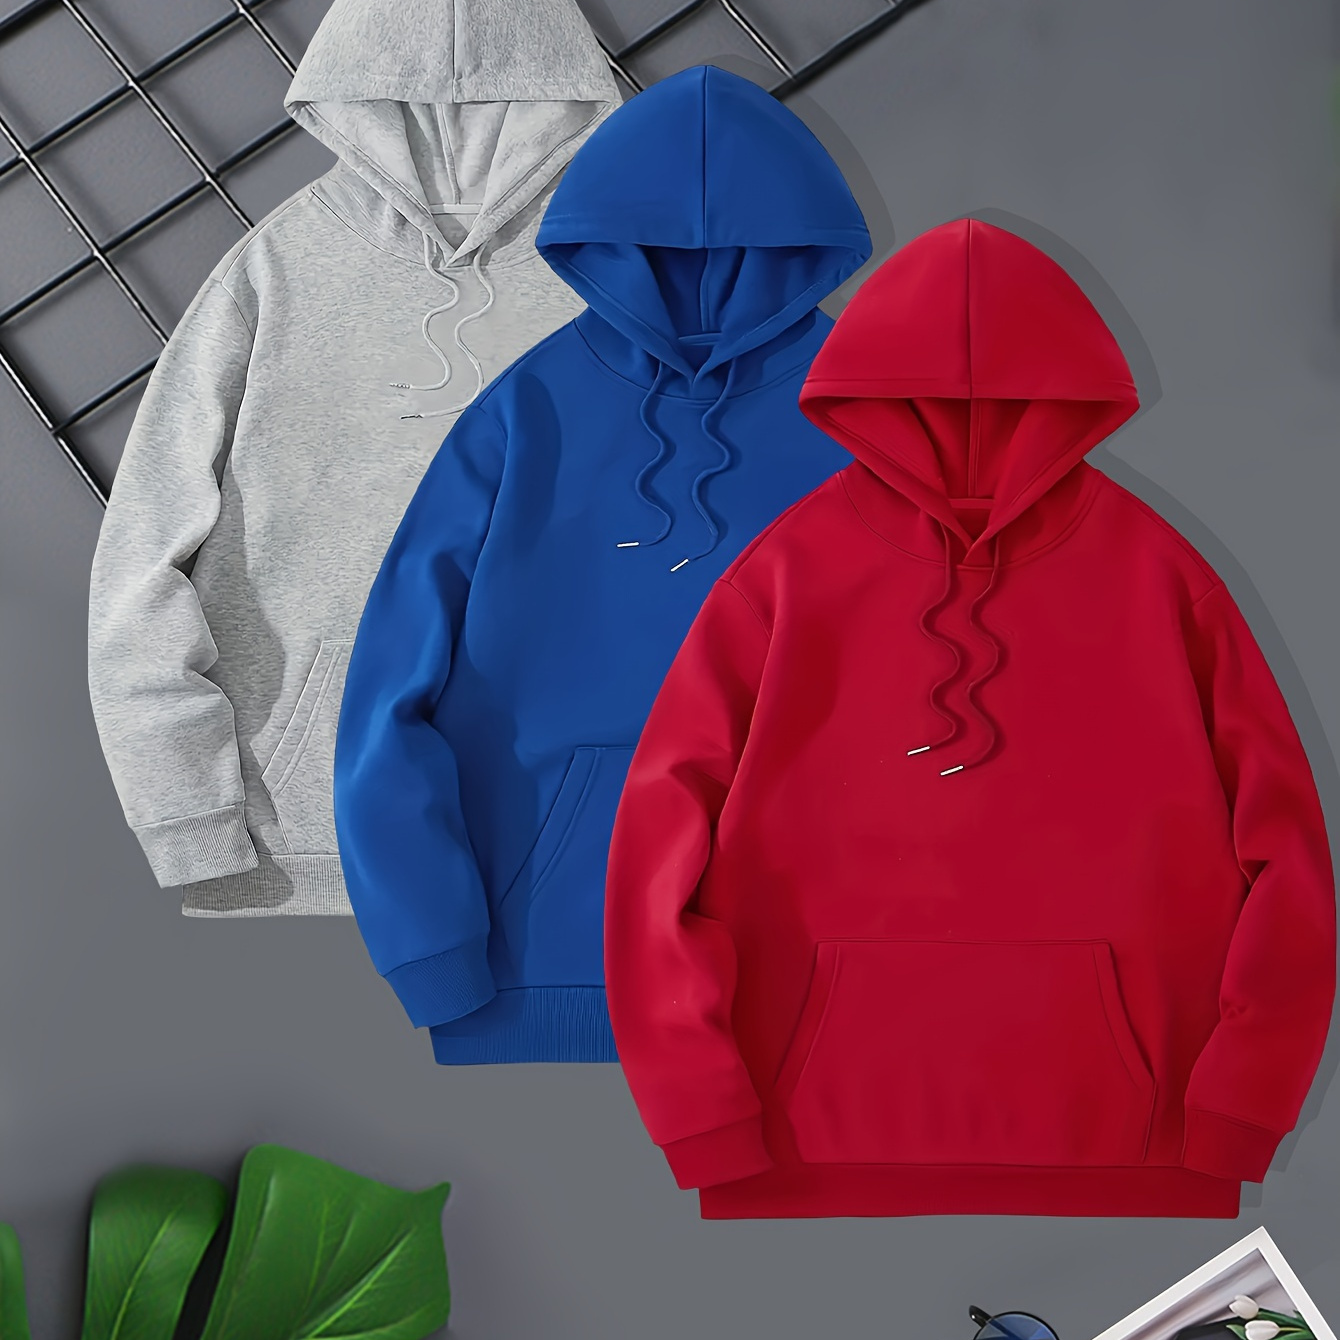 

3pcs Hoodies Set For Men, Men's Casual Solid Basic Hooded Sweatshirt Streetwear For Winter Fall, As Gifts